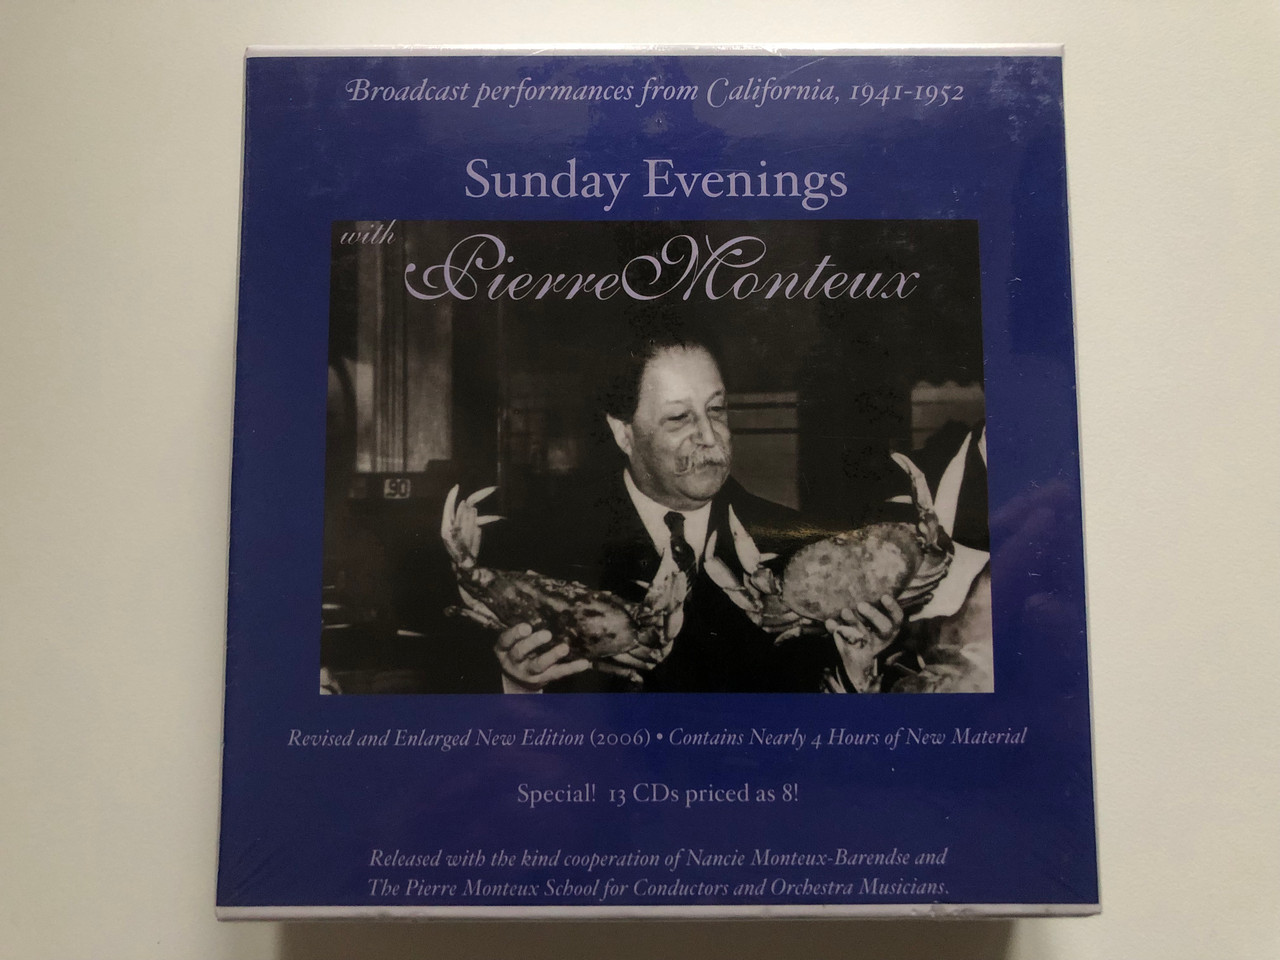 https://cdn10.bigcommerce.com/s-62bdpkt7pb/products/0/images/216073/Sunday_Evenings_With_Pierre_Monteux_Broadcast_Performances_From_California_1941-1952_Revised_and_Englarged_New_Edition_2006_Contains_Nearly_4_Hours_of_New_Material_Music_Arts_13x_Aud__23555.1646974774.1280.1280.JPG?c=2&_gl=1*1c1zs51*_ga*MjA2NTIxMjE2MC4xNTkwNTEyNTMy*_ga_WS2VZYPC6G*MTY0Njk3MTIxOS4zMTguMS4xNjQ2OTc0NzY3LjYw